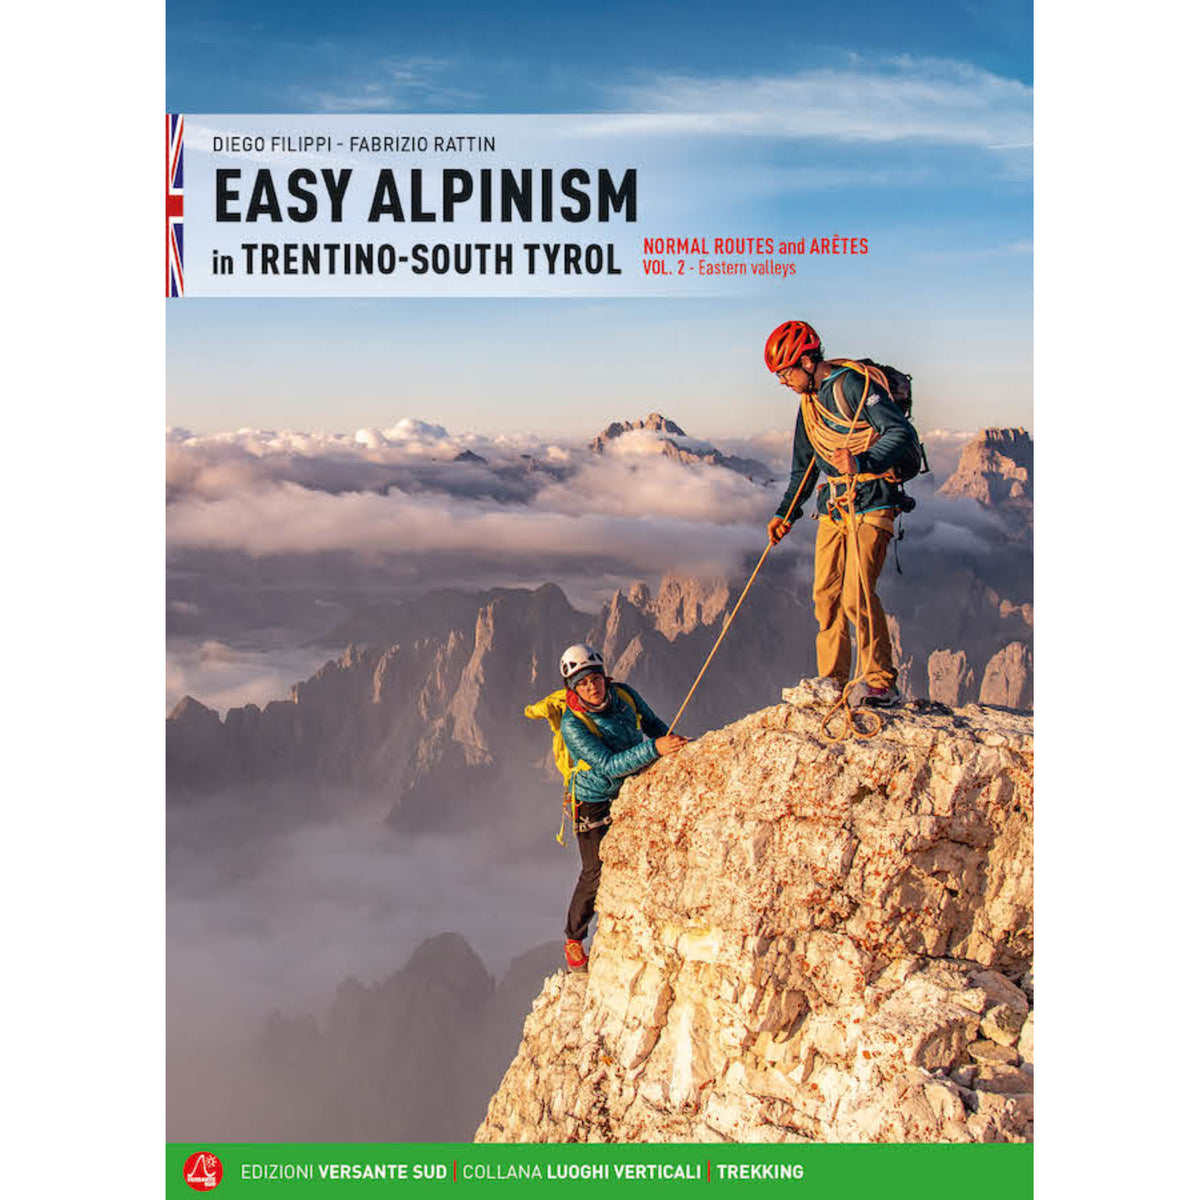 Easy Alpinism in Trentino: South Tyrol: Vol 2 guide book